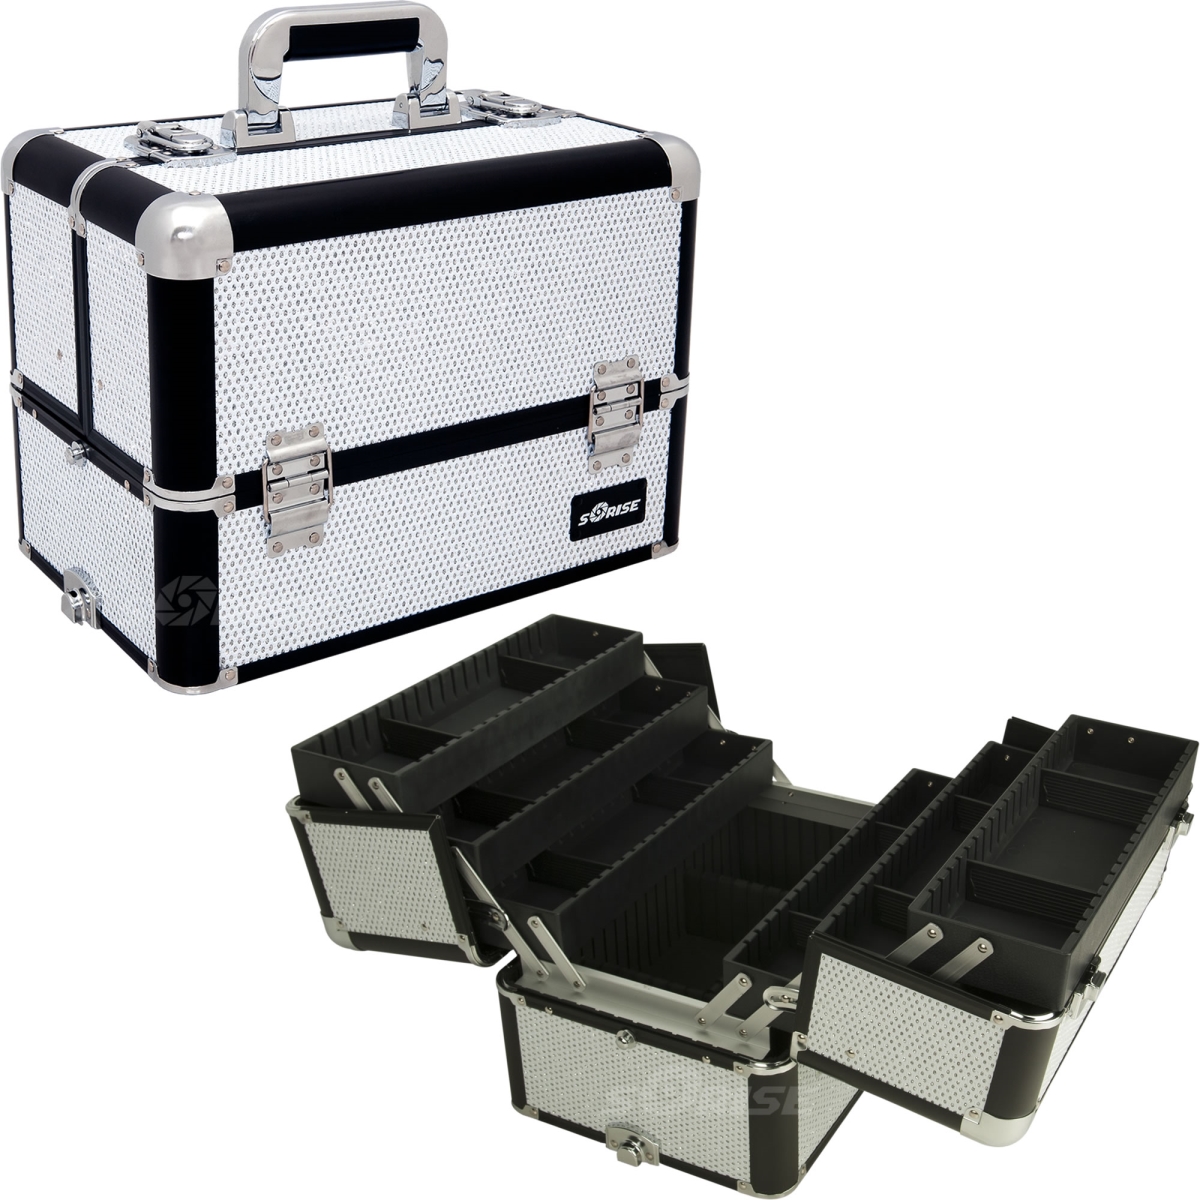 E3304klwb Interchangeable 6-tiers Extendable Tray Krystal Pattern Professional Aluminum Cosmetic Makeup Case With Dividers - White